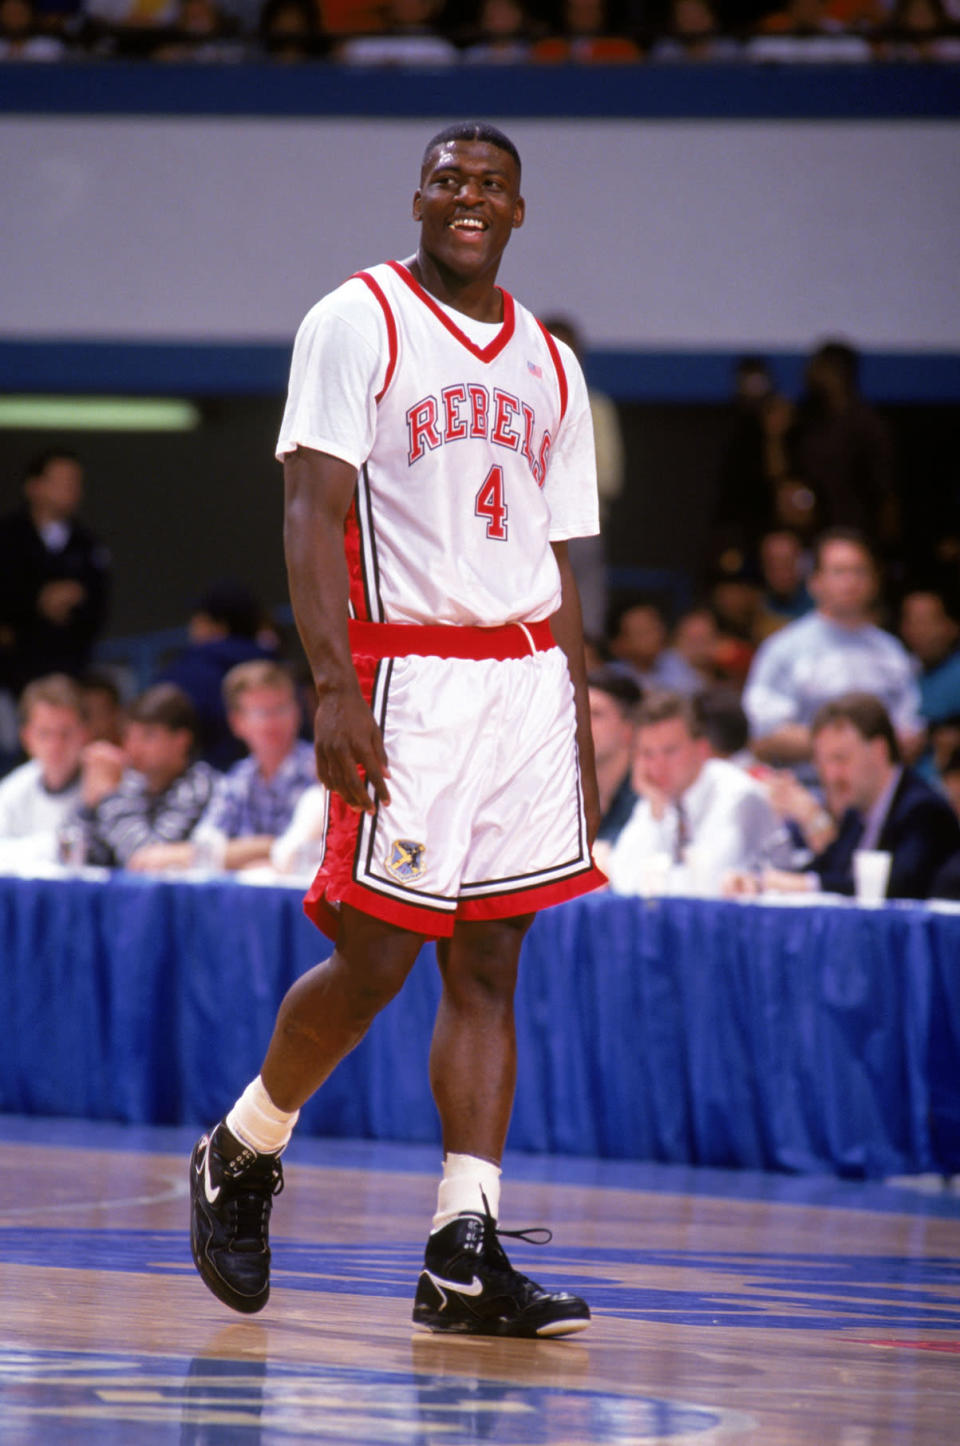 Larry Johnson was the best player on one of college basketball's most iconic teams. Built like a linebacker, the UNLV forward led the Runnin' Rebels to two Final Fours and a dominant NCAA championship win over Duke. (Photo by Stephen Wade/Getty Images)